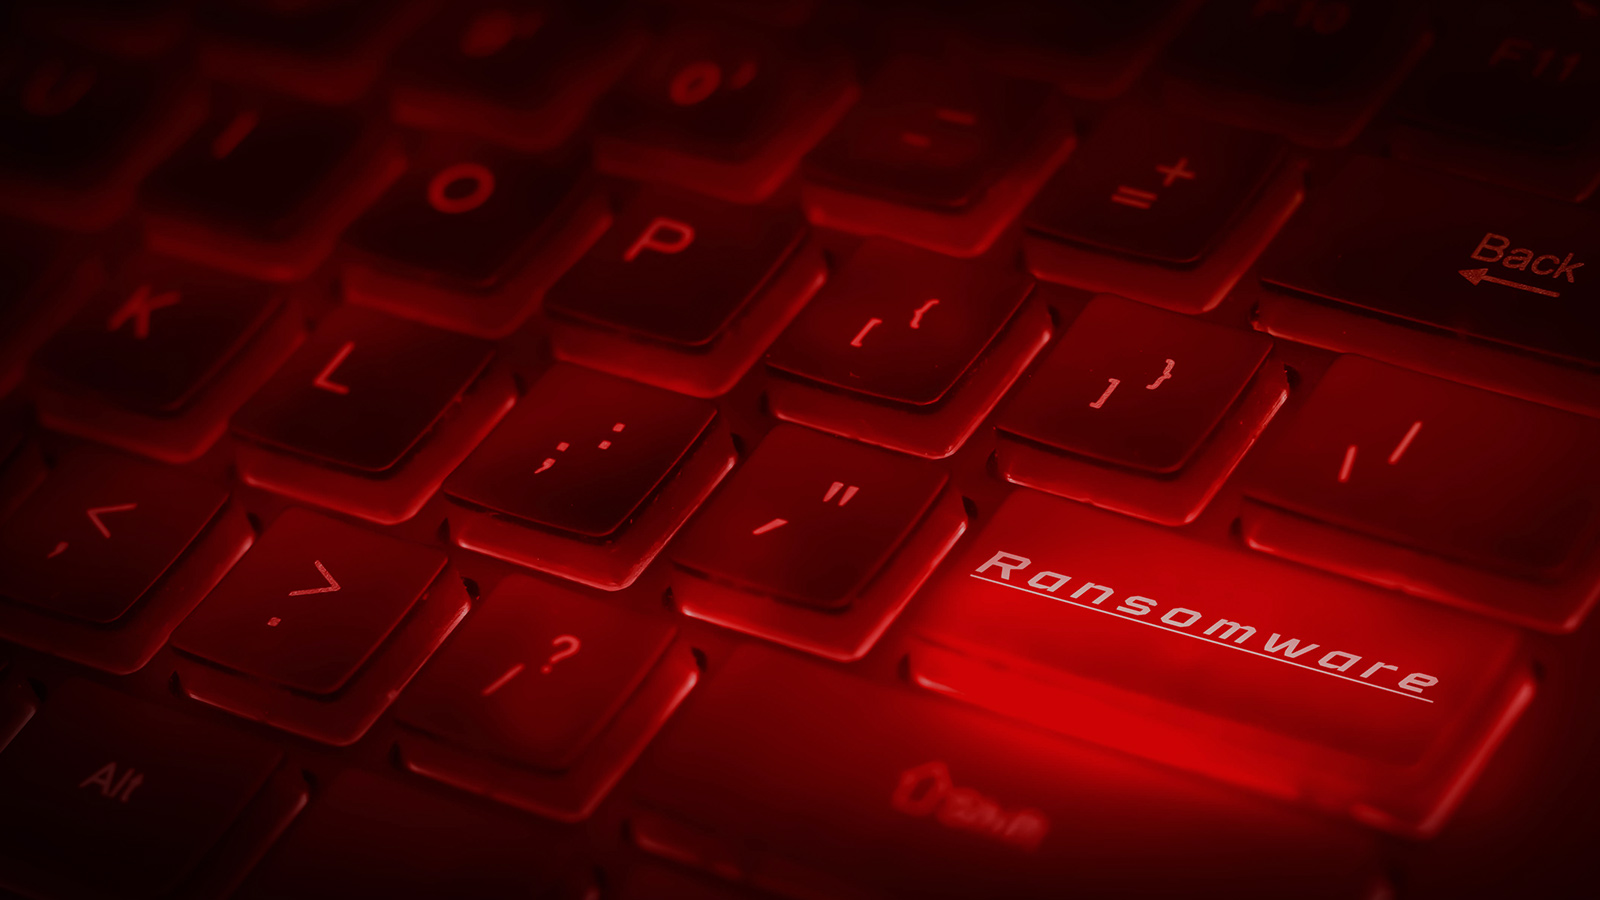 Computer keyboard in dark red with enter key as the word Ransomware in white